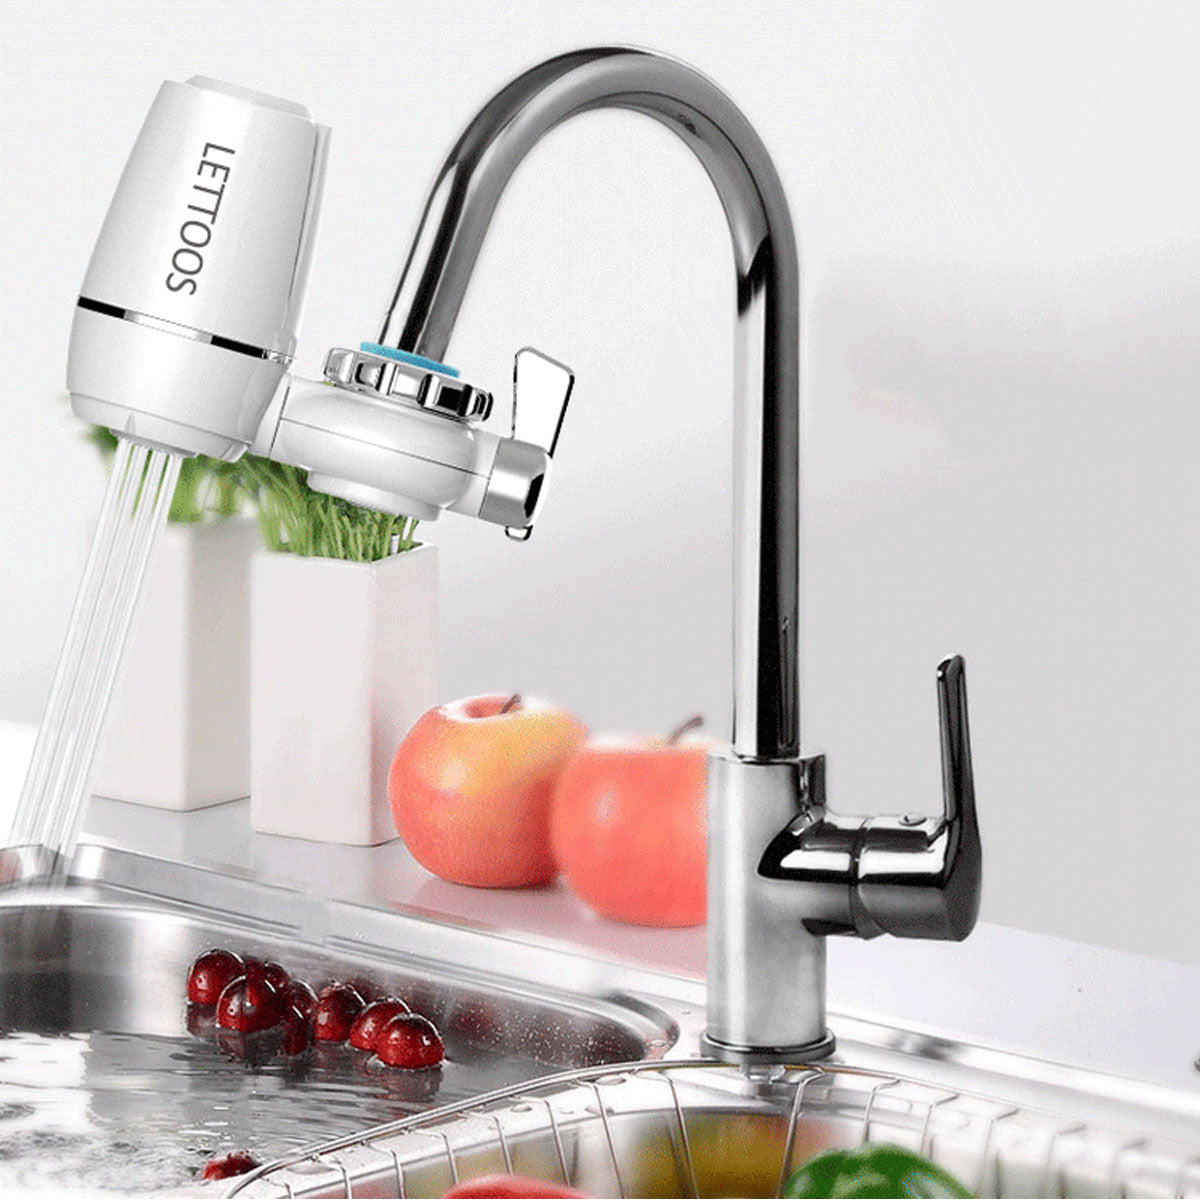 FilterFaucet™ Finally clean & drinkable water from every tap!